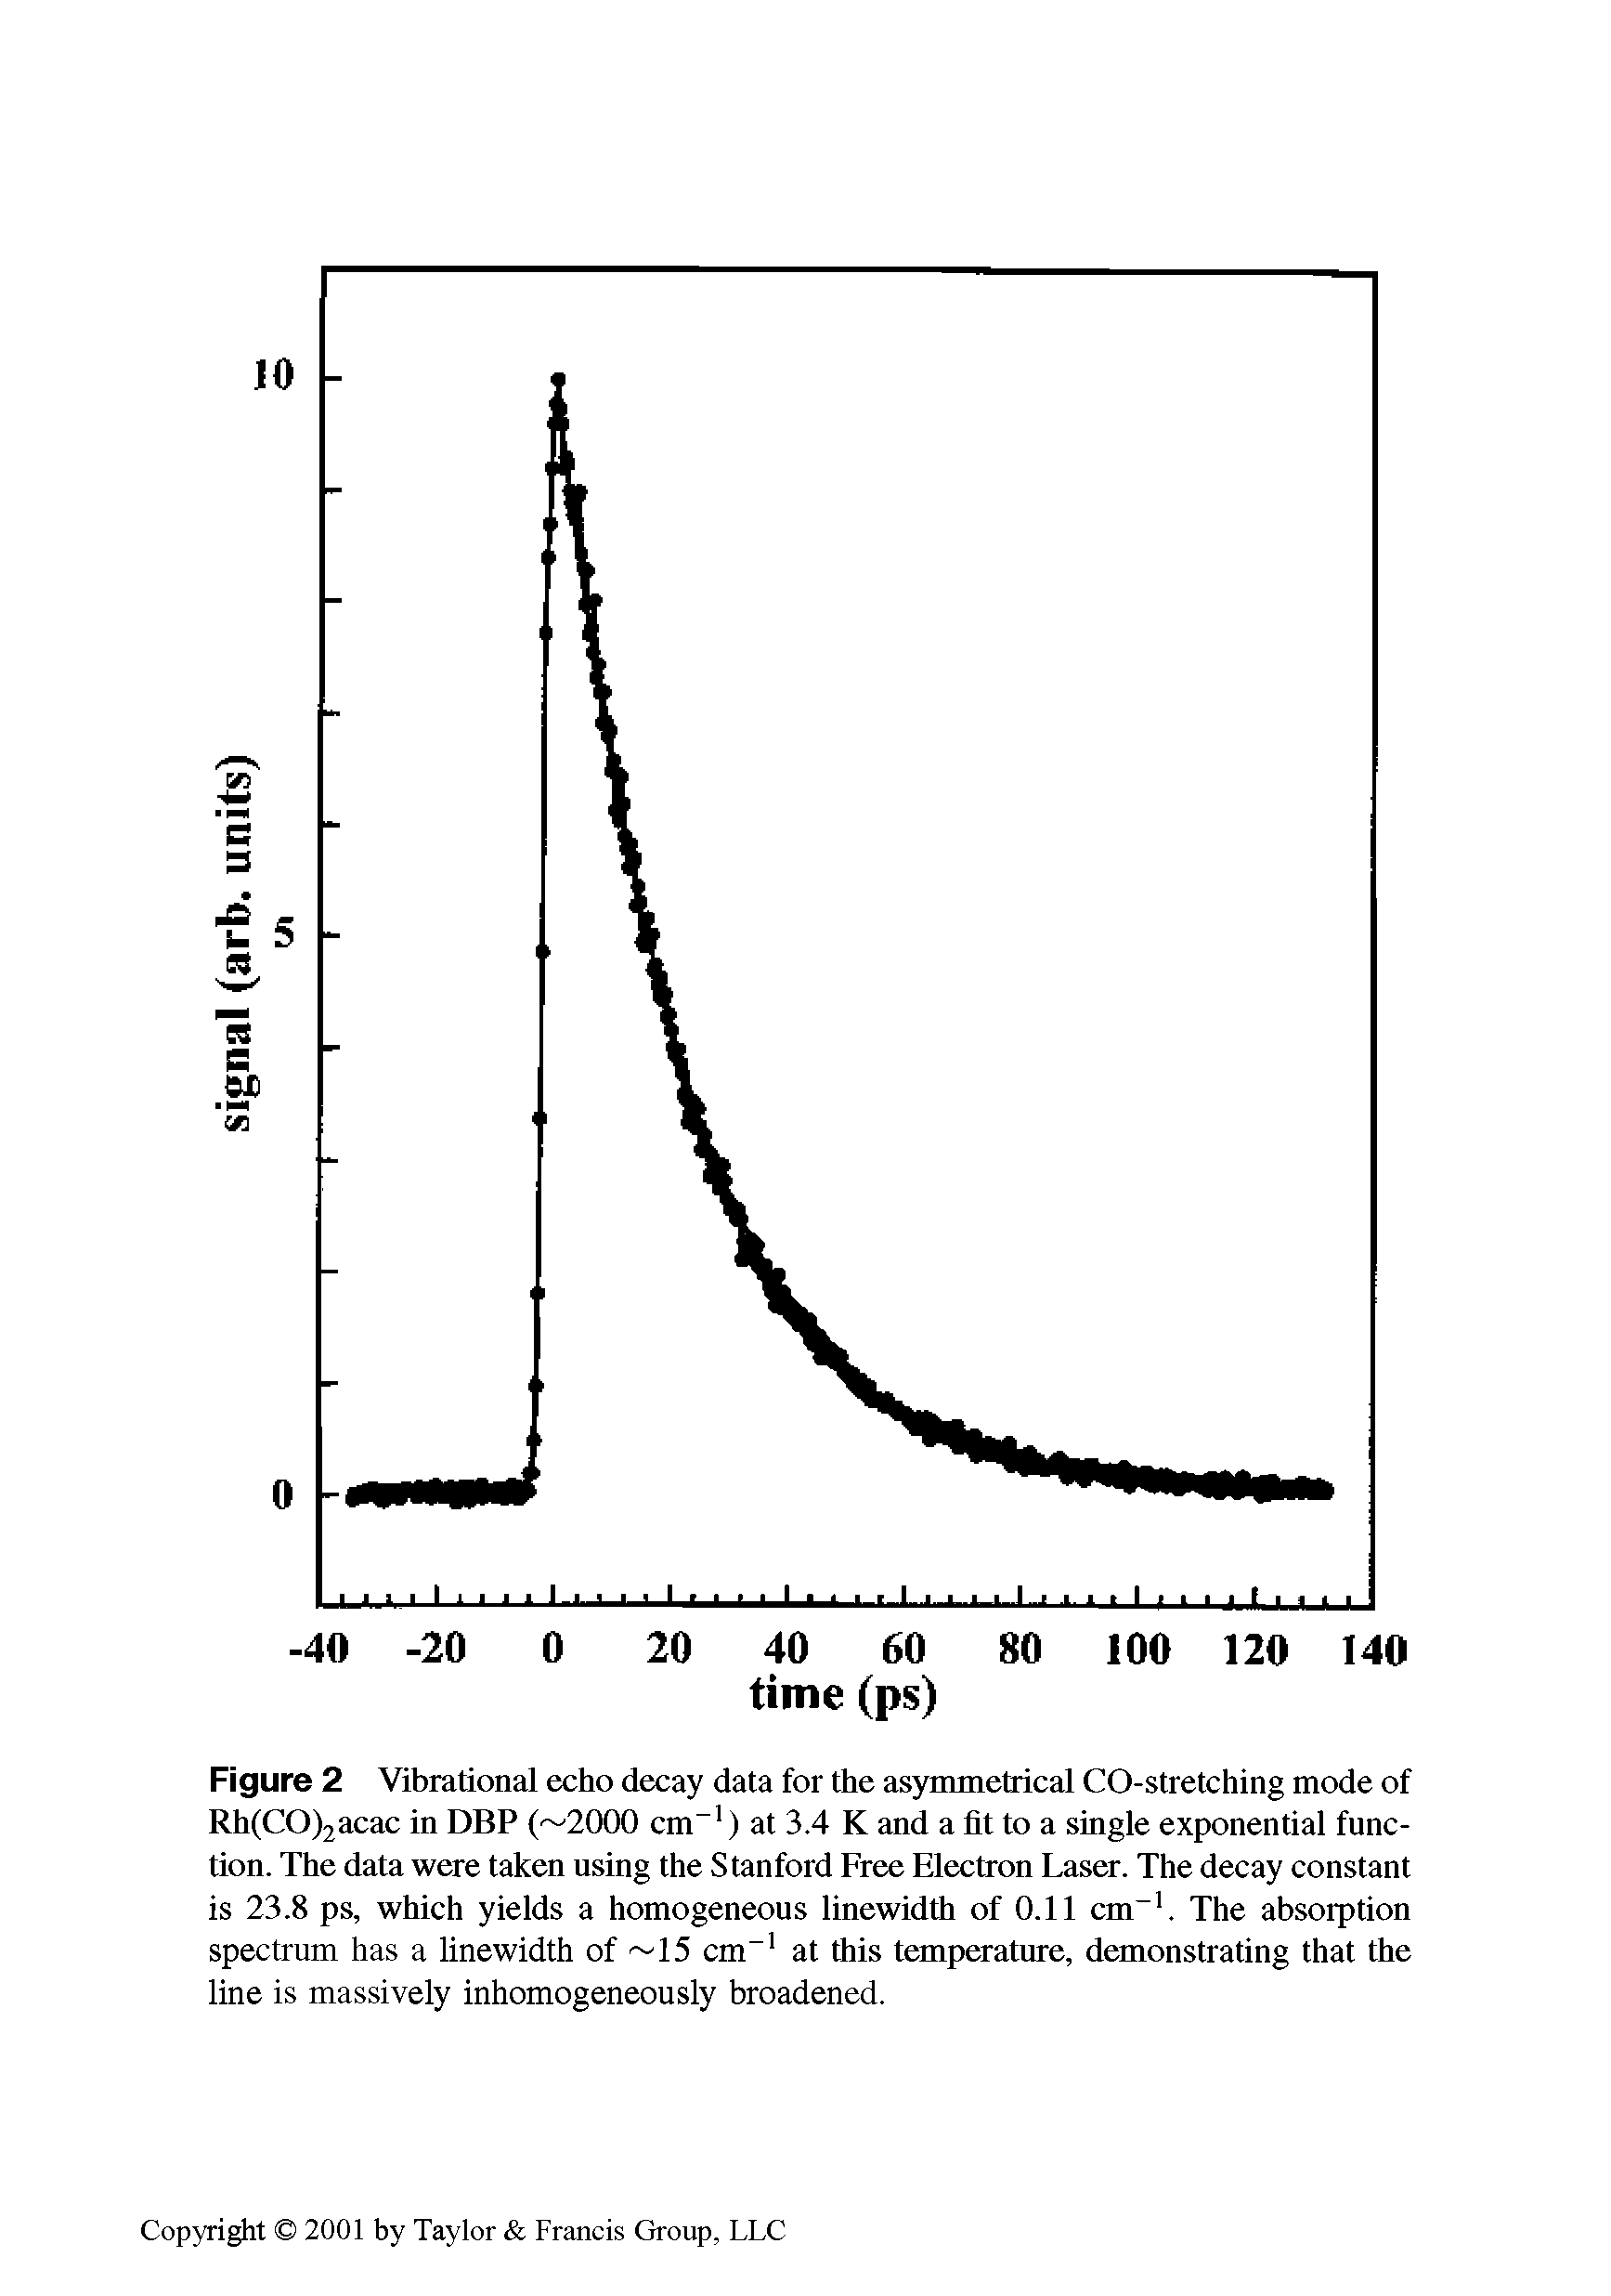 Figure 2 Vibrational echo decay data for the asymmetrical CO-stretching mode of Rh(CO)2acac in DBP ( 2000 cm-1) at 3.4 K and a fit to a single exponential function. The data were taken using the Stanford Free Electron Laser. The decay constant is 23.8 ps, which yields a homogeneous linewidth of 0.11 cm-1. The absorption spectrum has a linewidth of 15 cm-1 at this temperature, demonstrating that the line is massively inhomogeneously broadened.